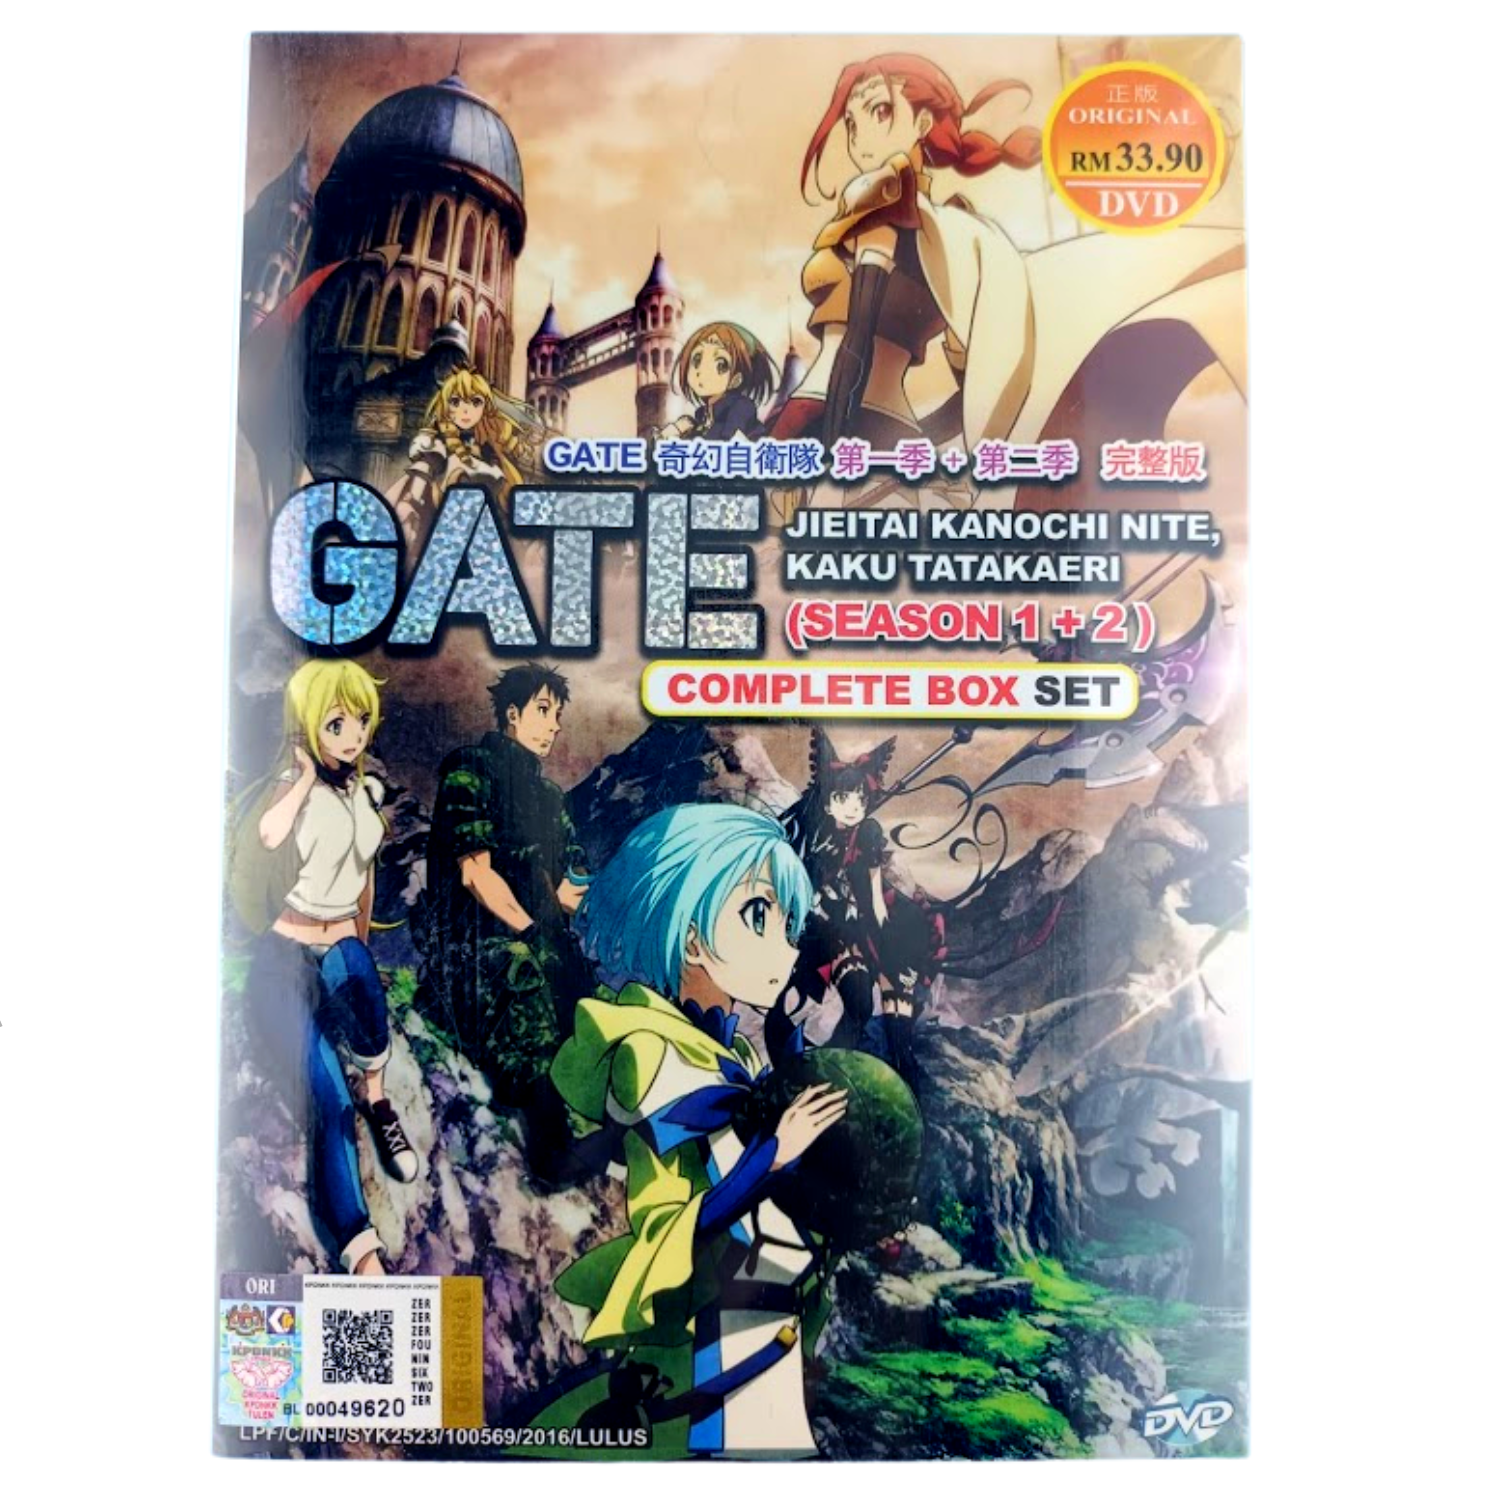 GATE 2nd Season Anime Series Review  Discussion  DoubleSama